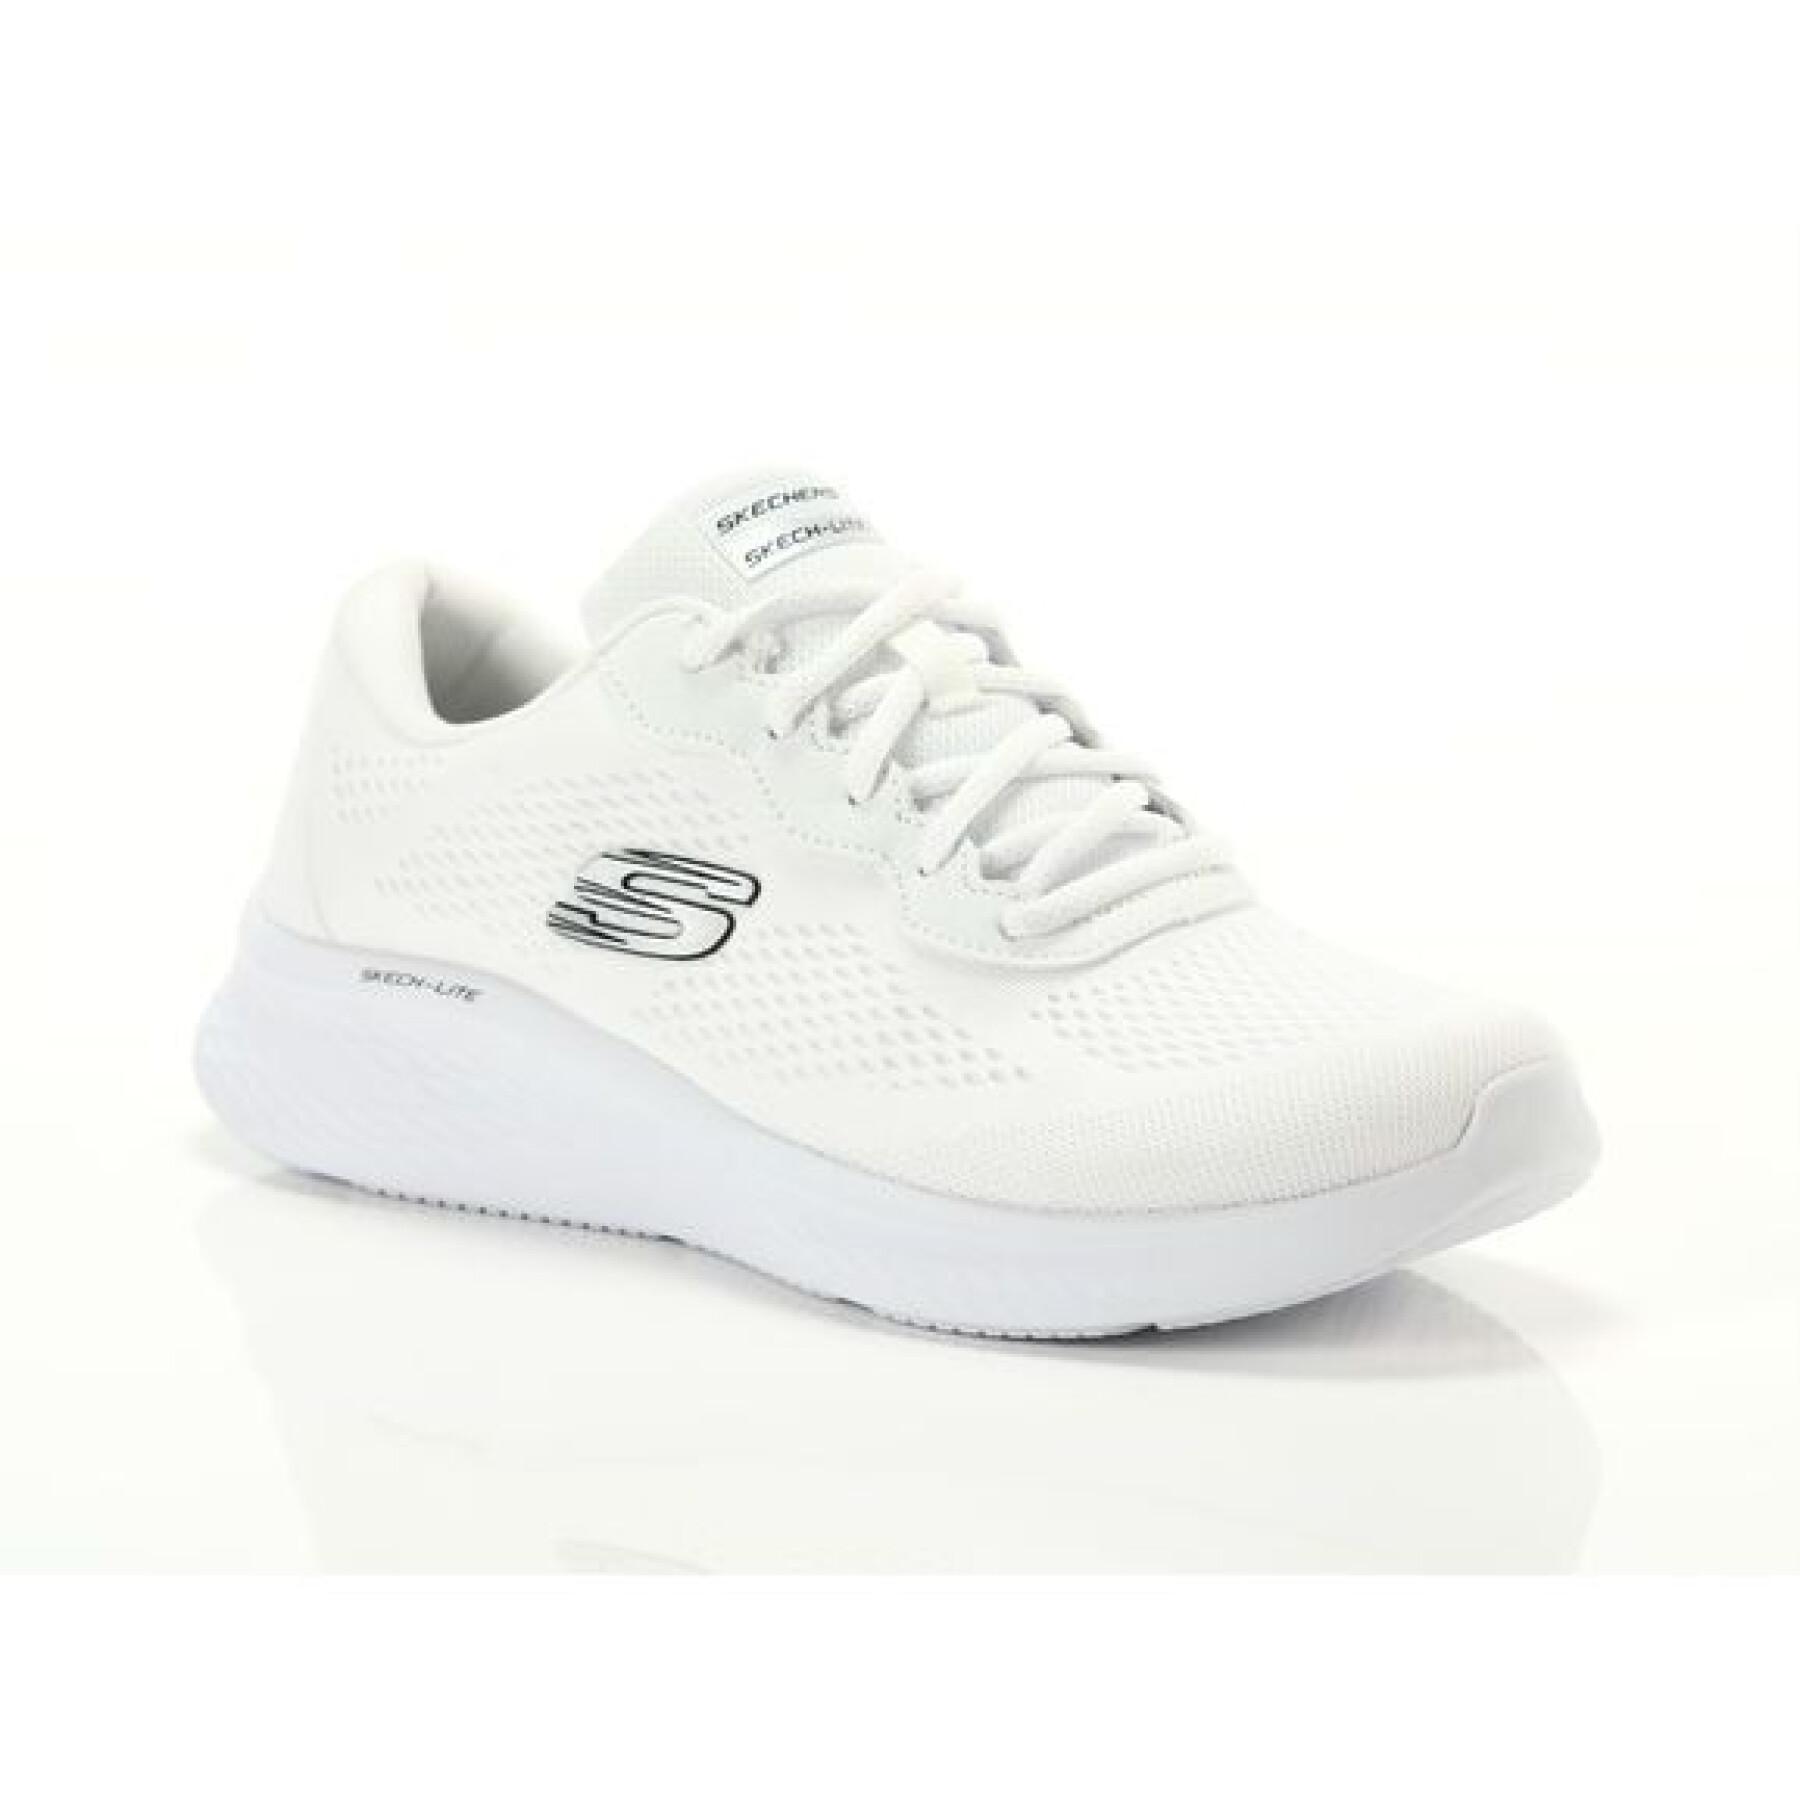 Damestrainers Skechers Skechlite Pro Perfect Time